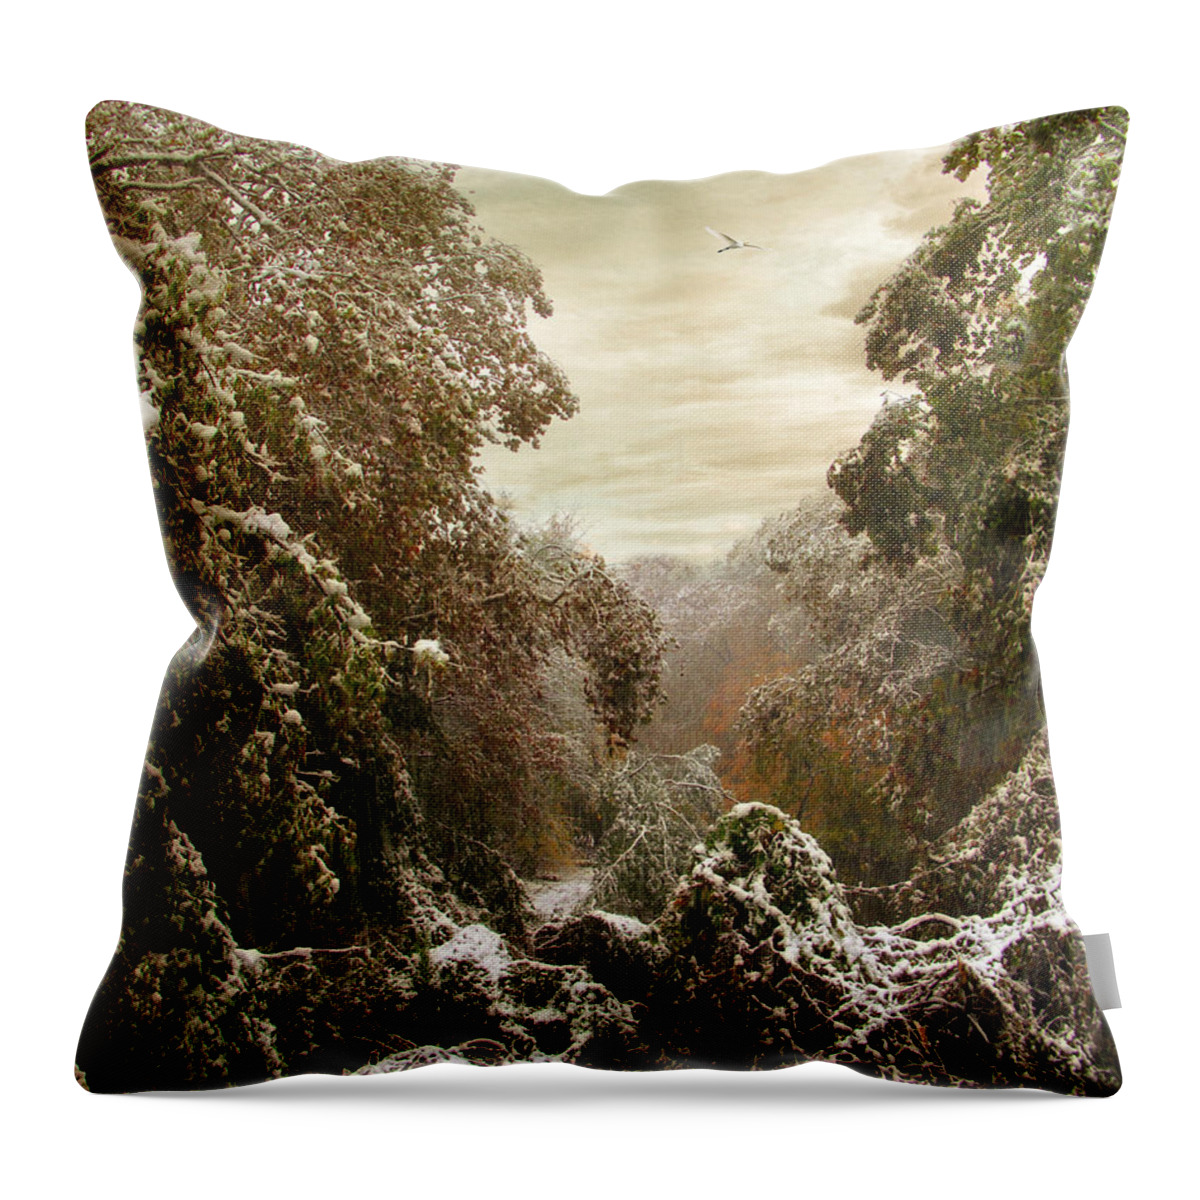 Winter Throw Pillow featuring the photograph An Early Snow by Jessica Jenney